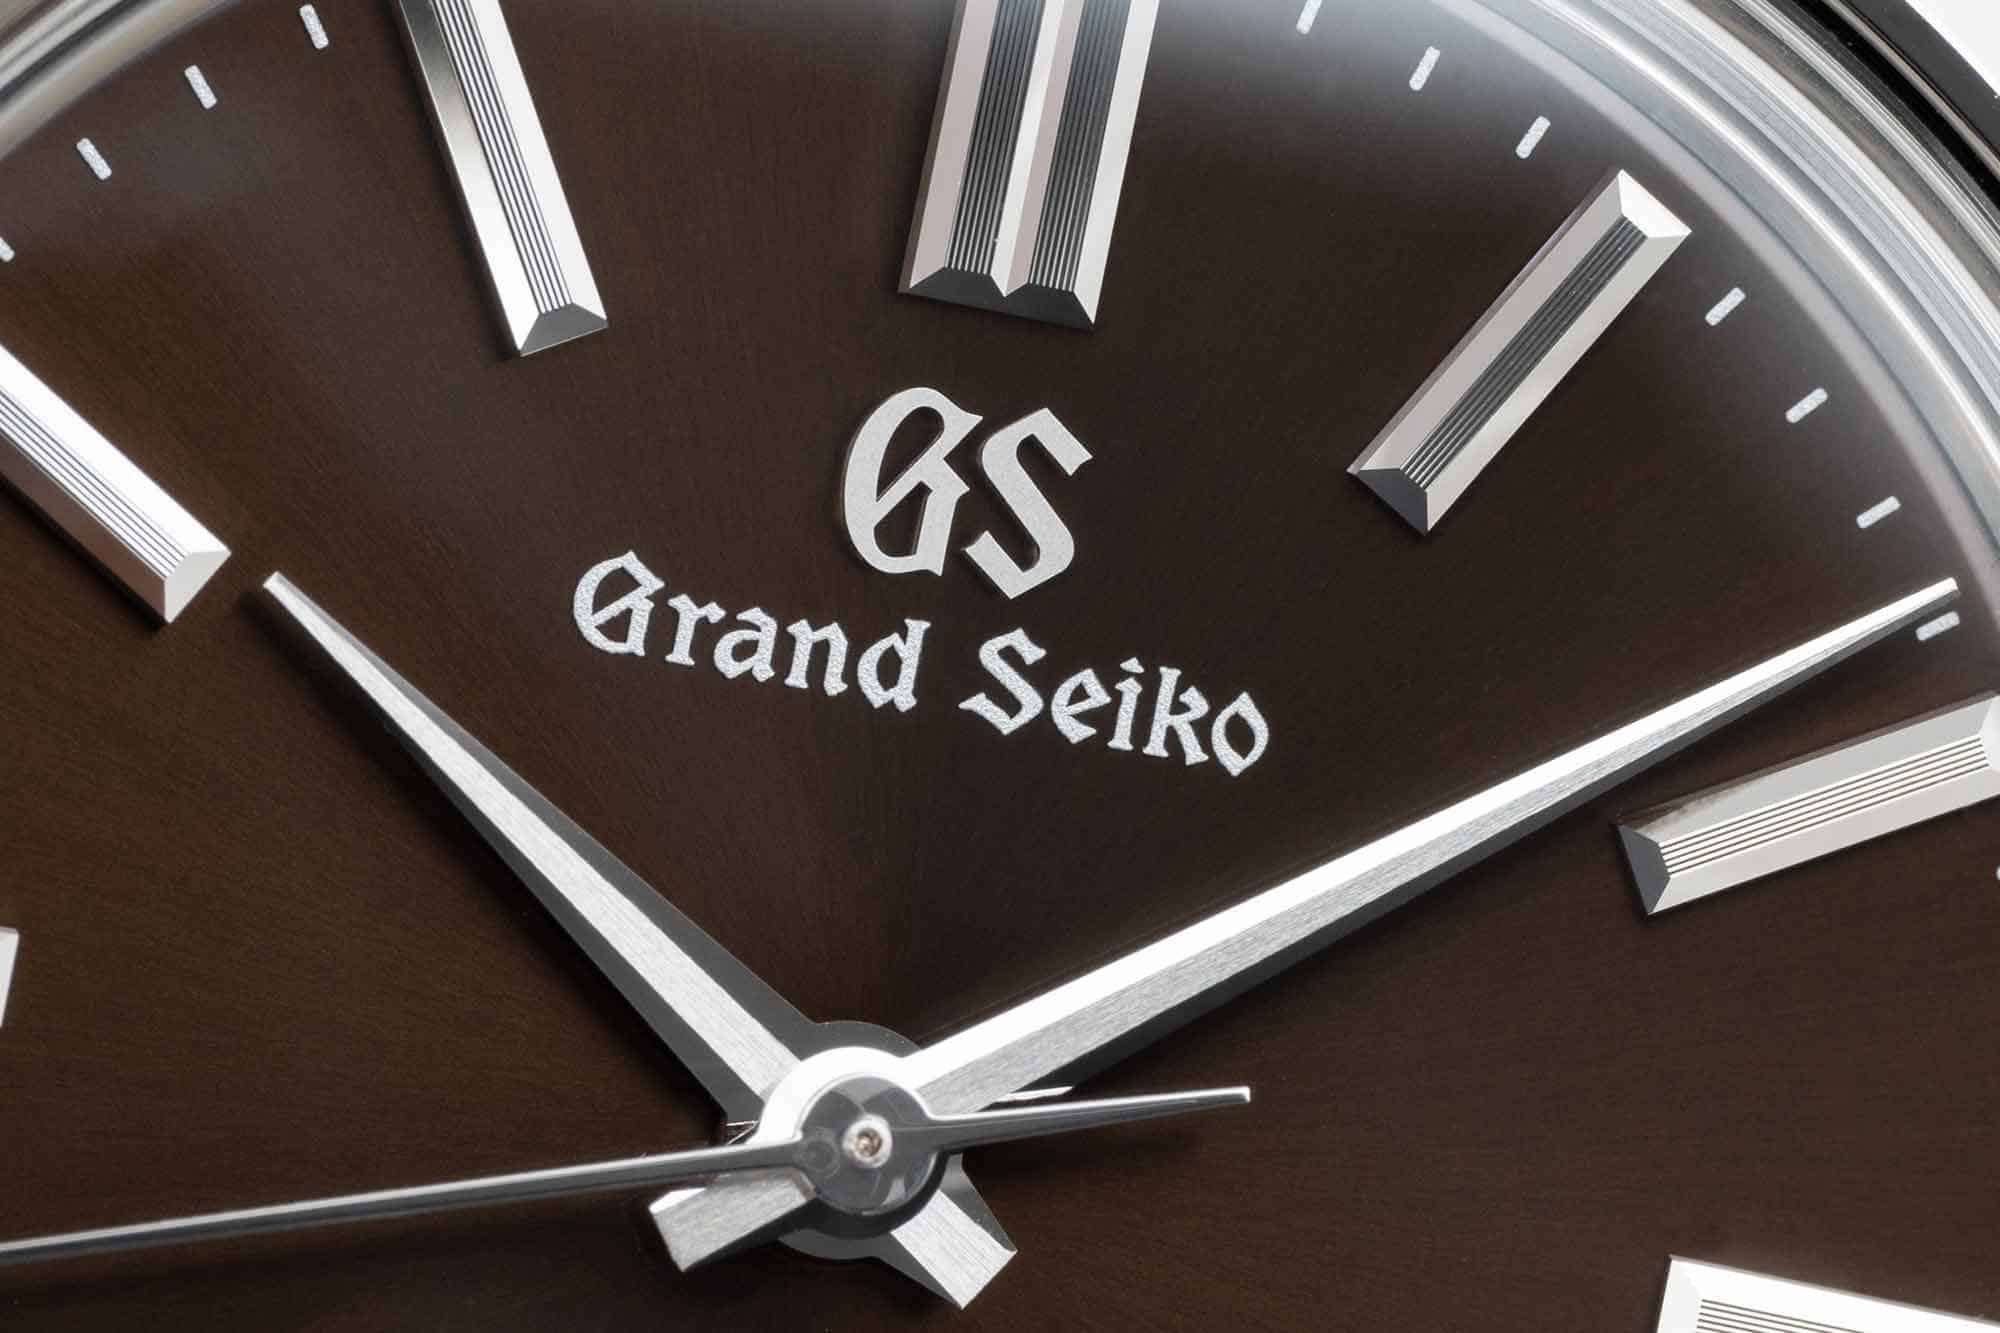 Grand Seiko Expands their Midsize with Two New Watches in a Smaller 44GS Case - Worn & Wound